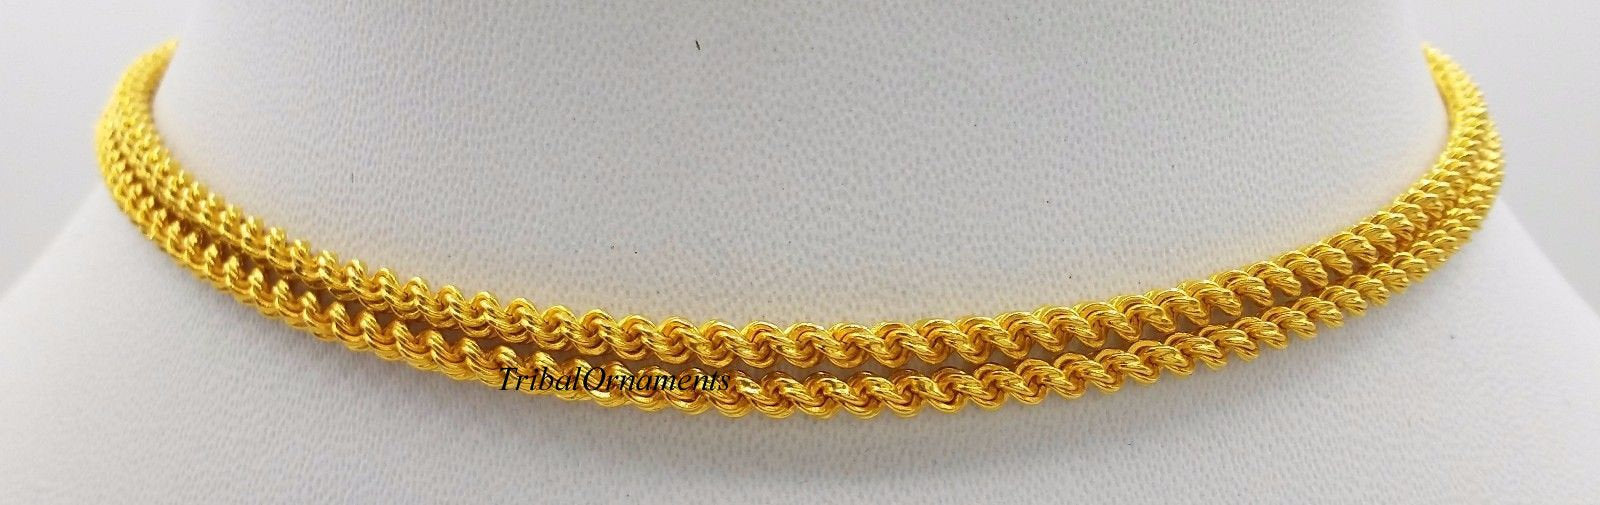 Best 14K Yellow Gold 4mm Rope Chain 22 Inch Diamond Cut Necklace Real 14KT  – Globalwatches10